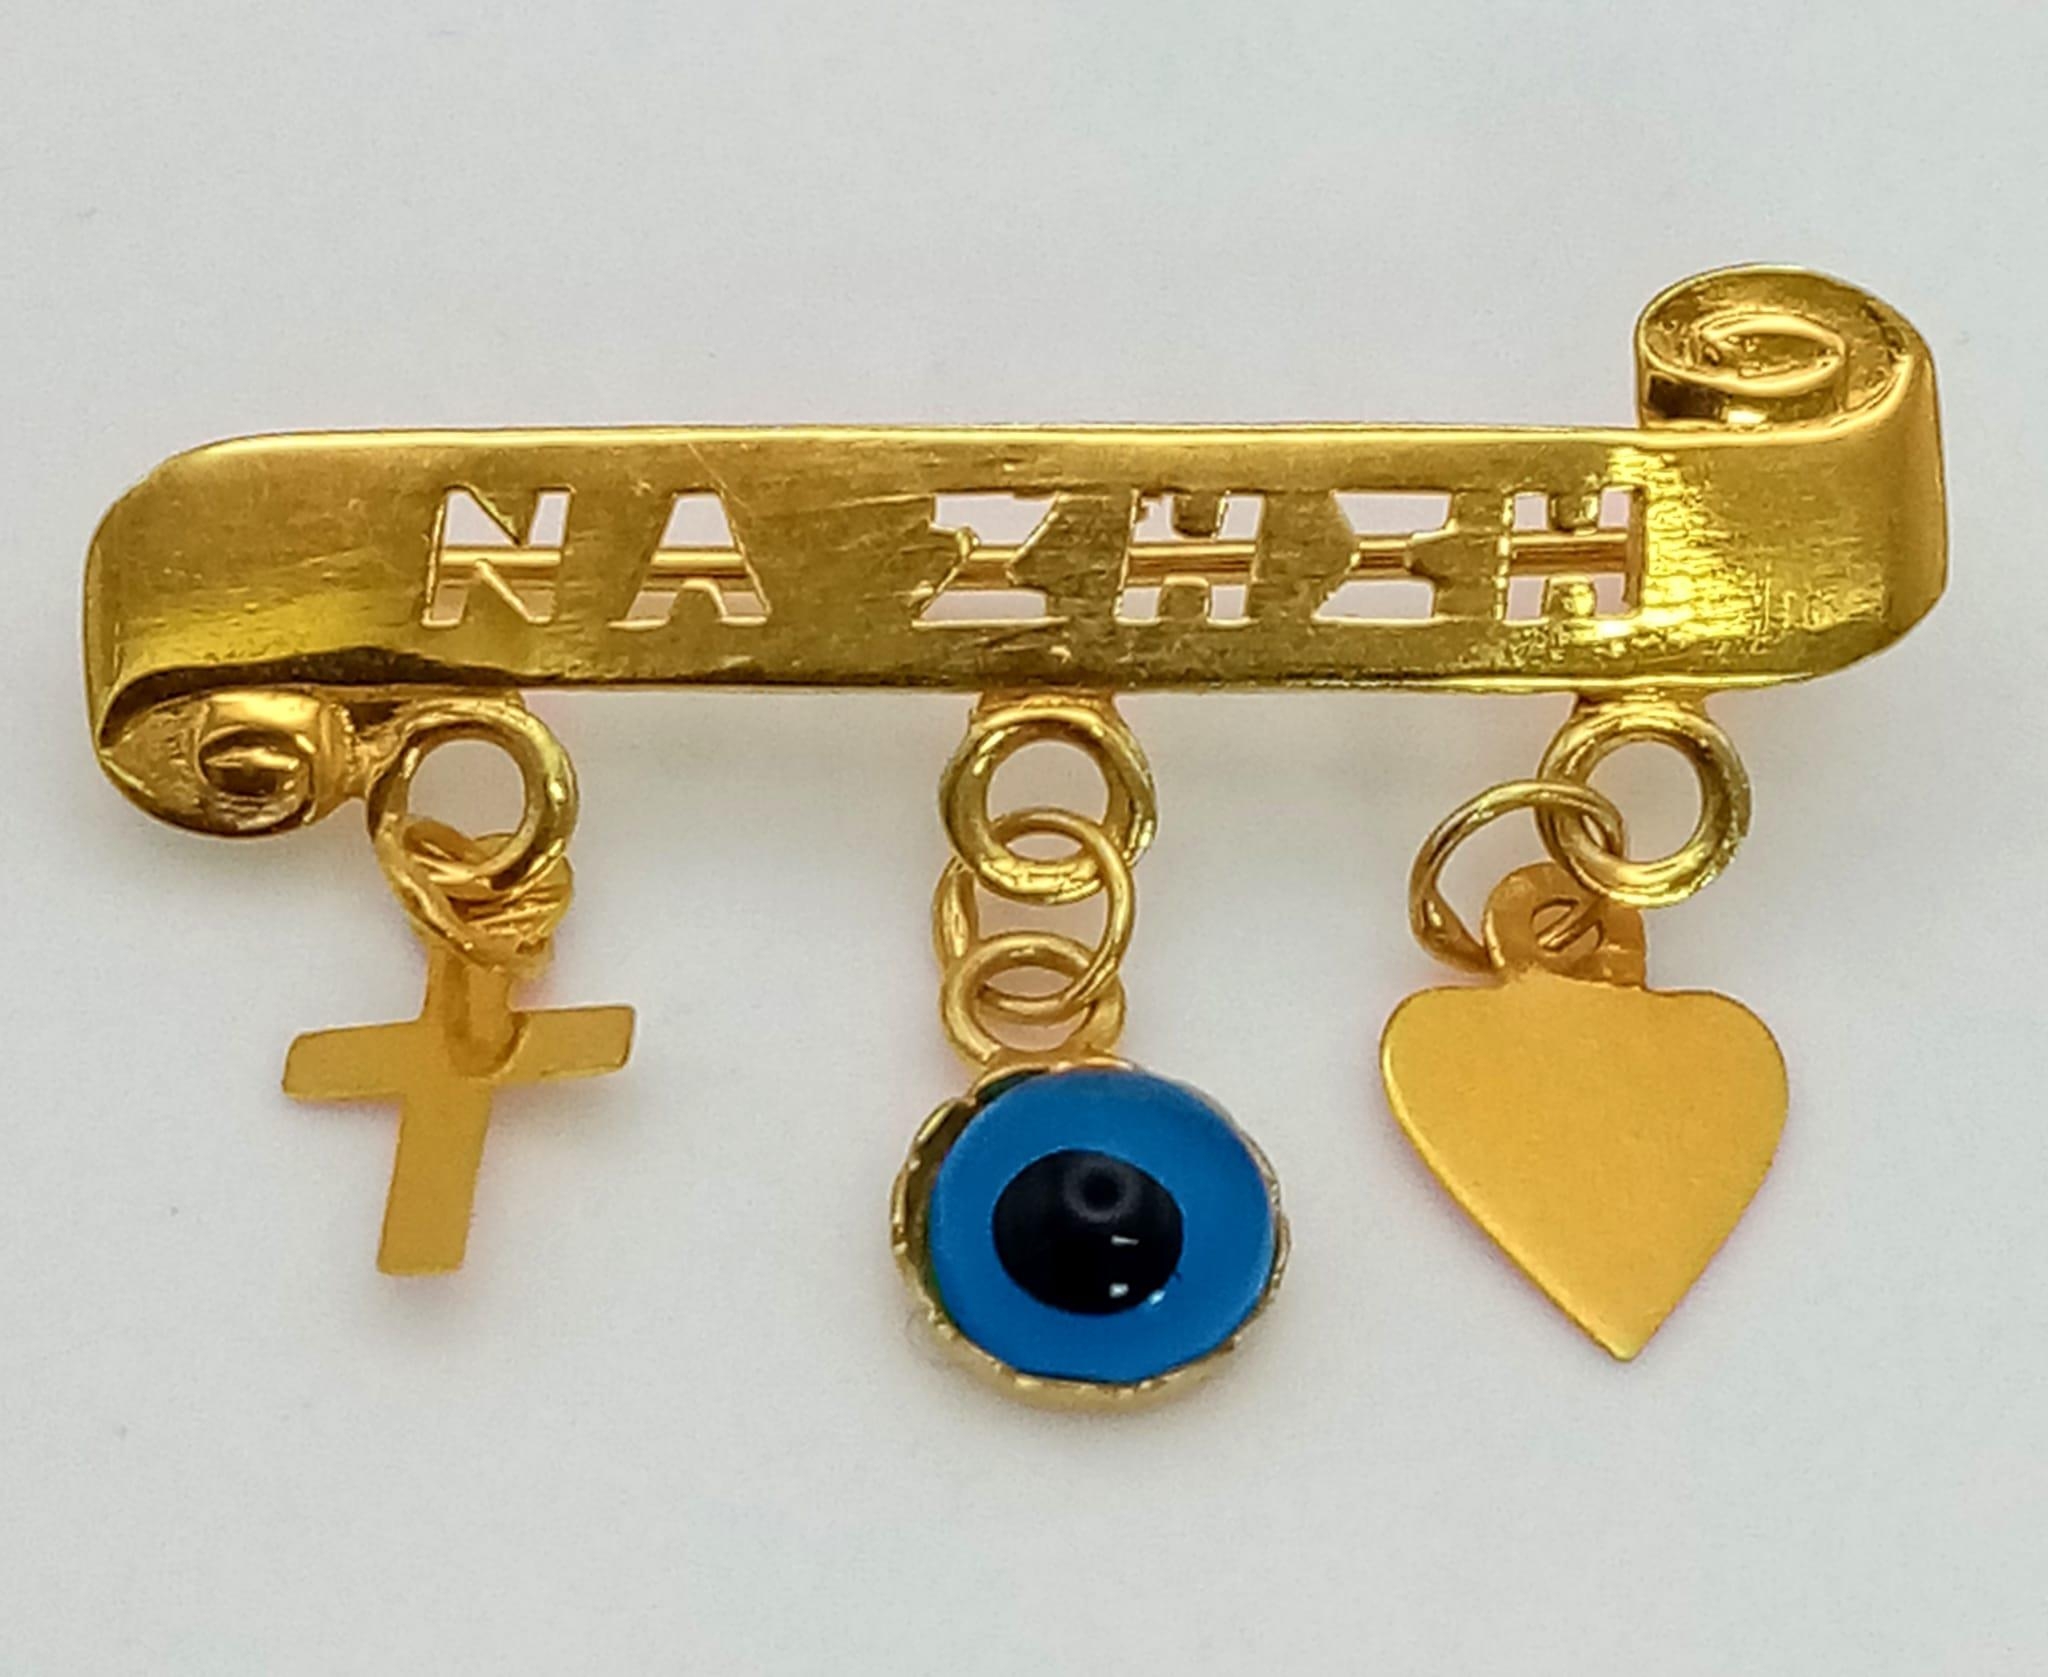 An 18K Yellow Gold Small Child's Brooch with Three Charms. Na Zhsh. 3cm. 1.31g total weight. - Image 2 of 4